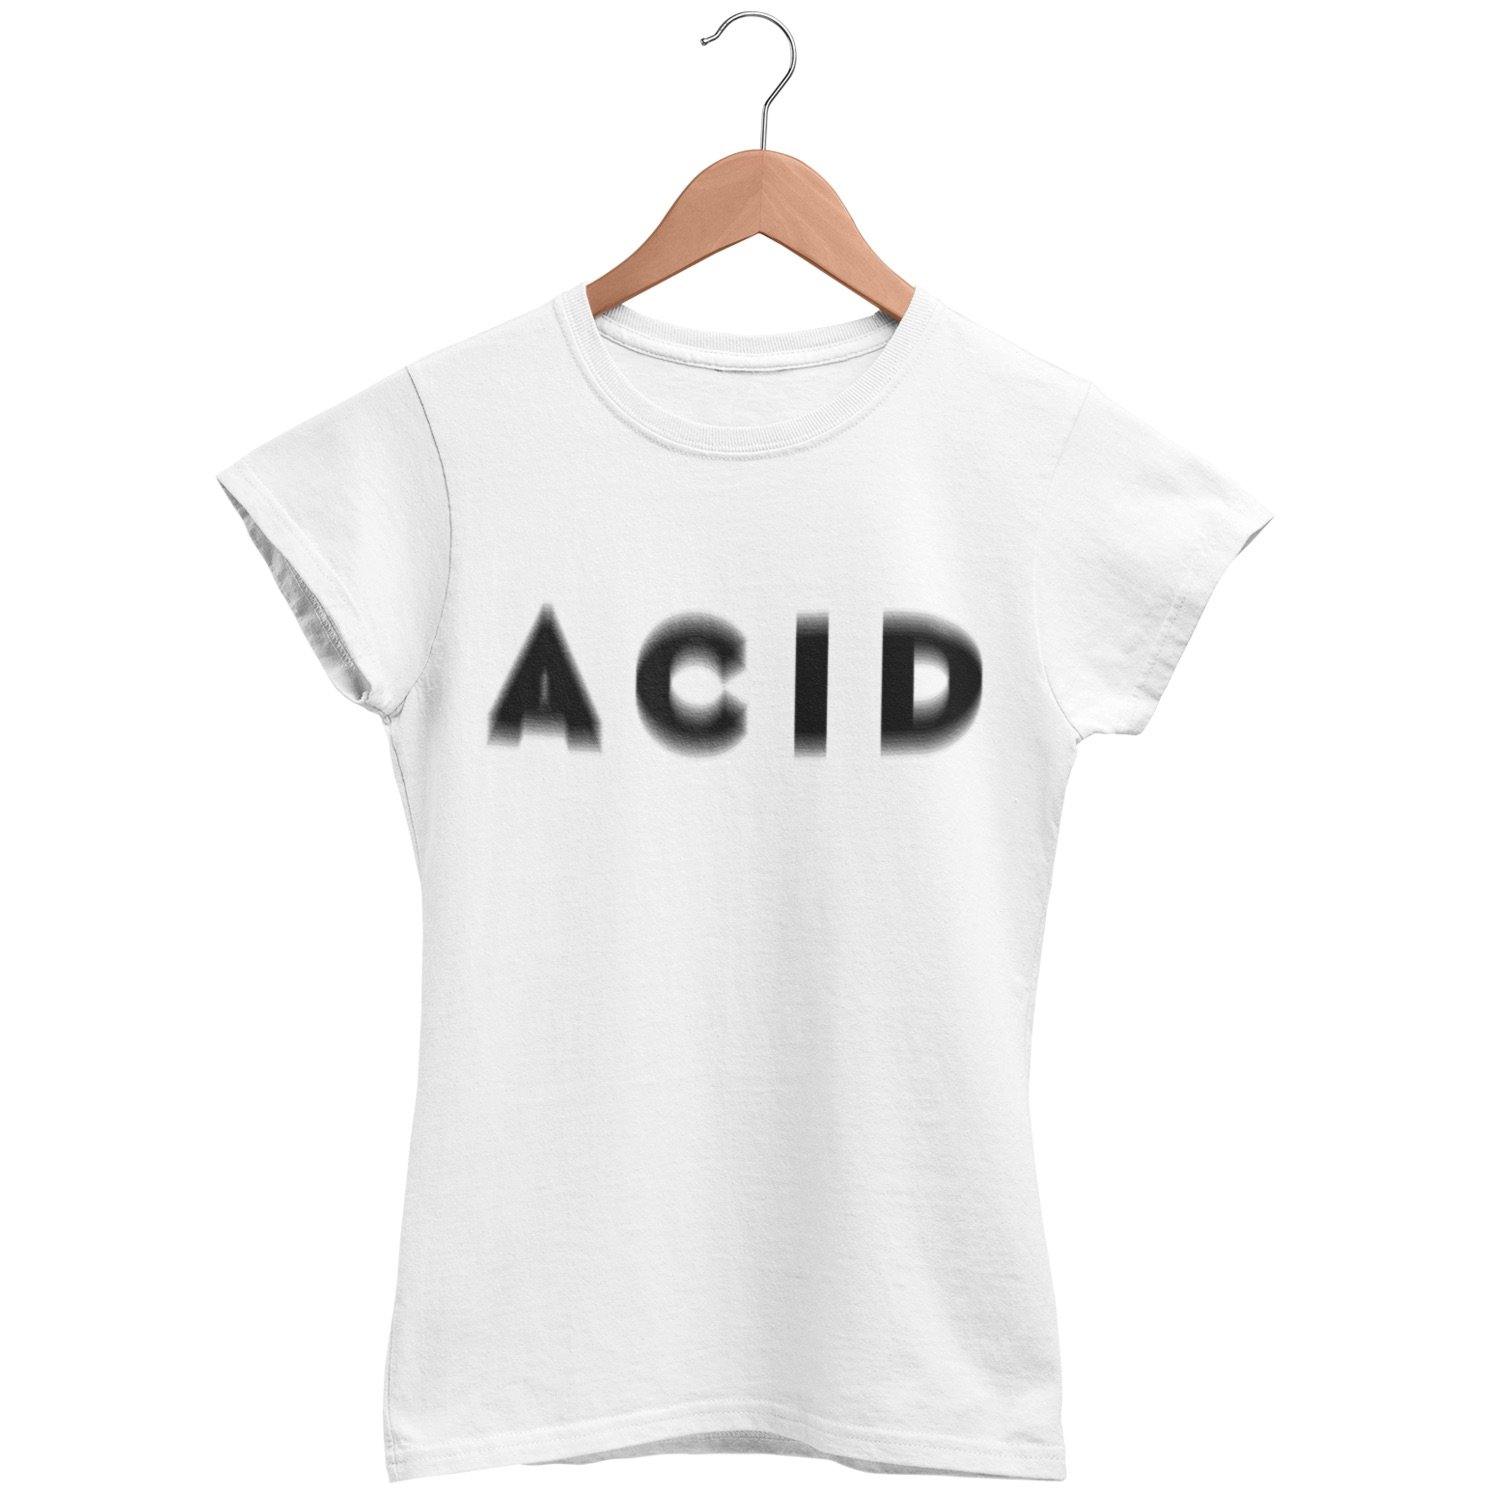 Acid Visual Effect Women's Fitted T-Shirt | Techno Outfit